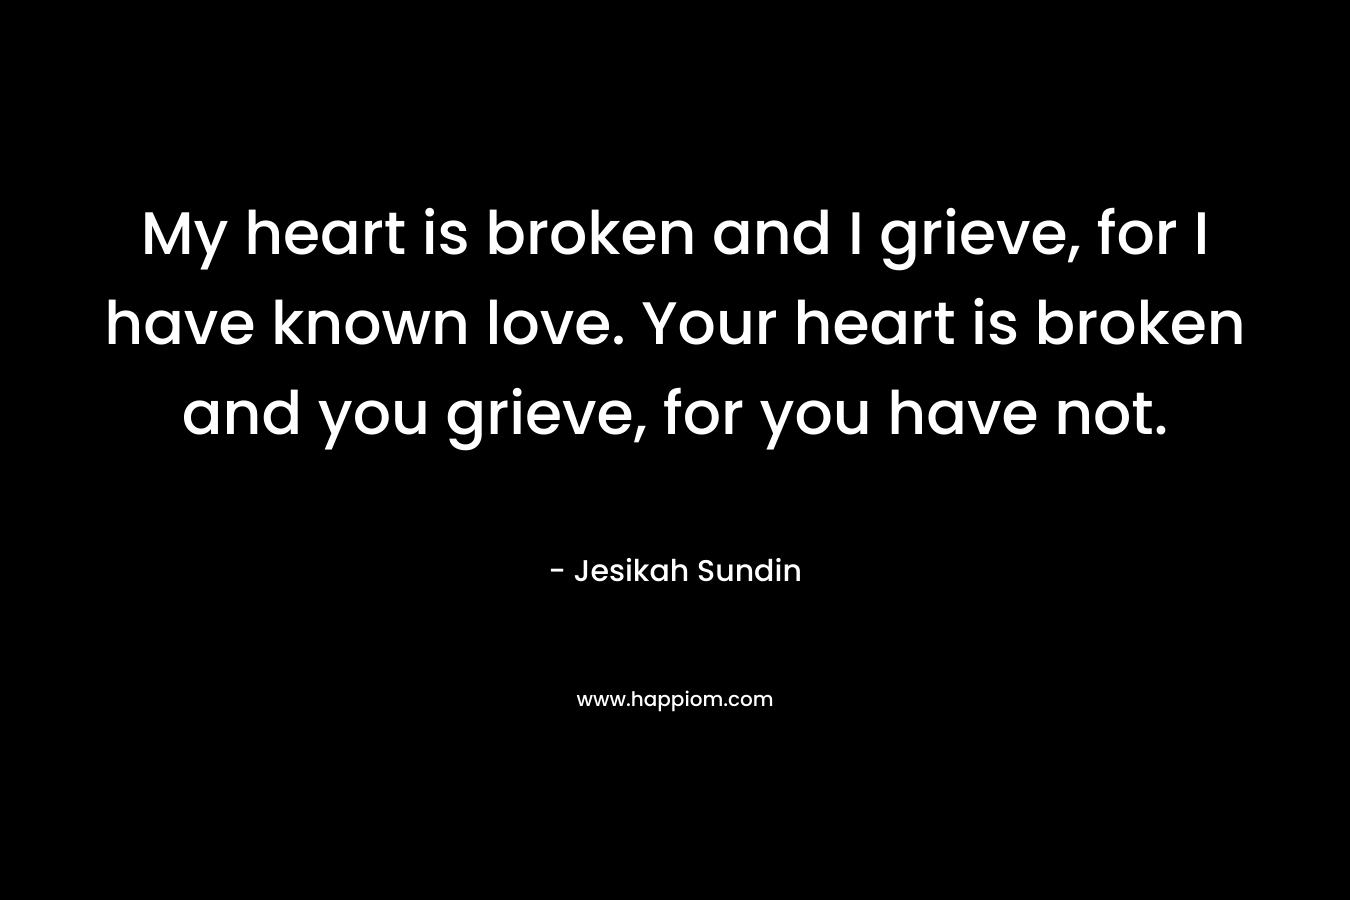 My heart is broken and I grieve, for I have known love. Your heart is broken and you grieve, for you have not.